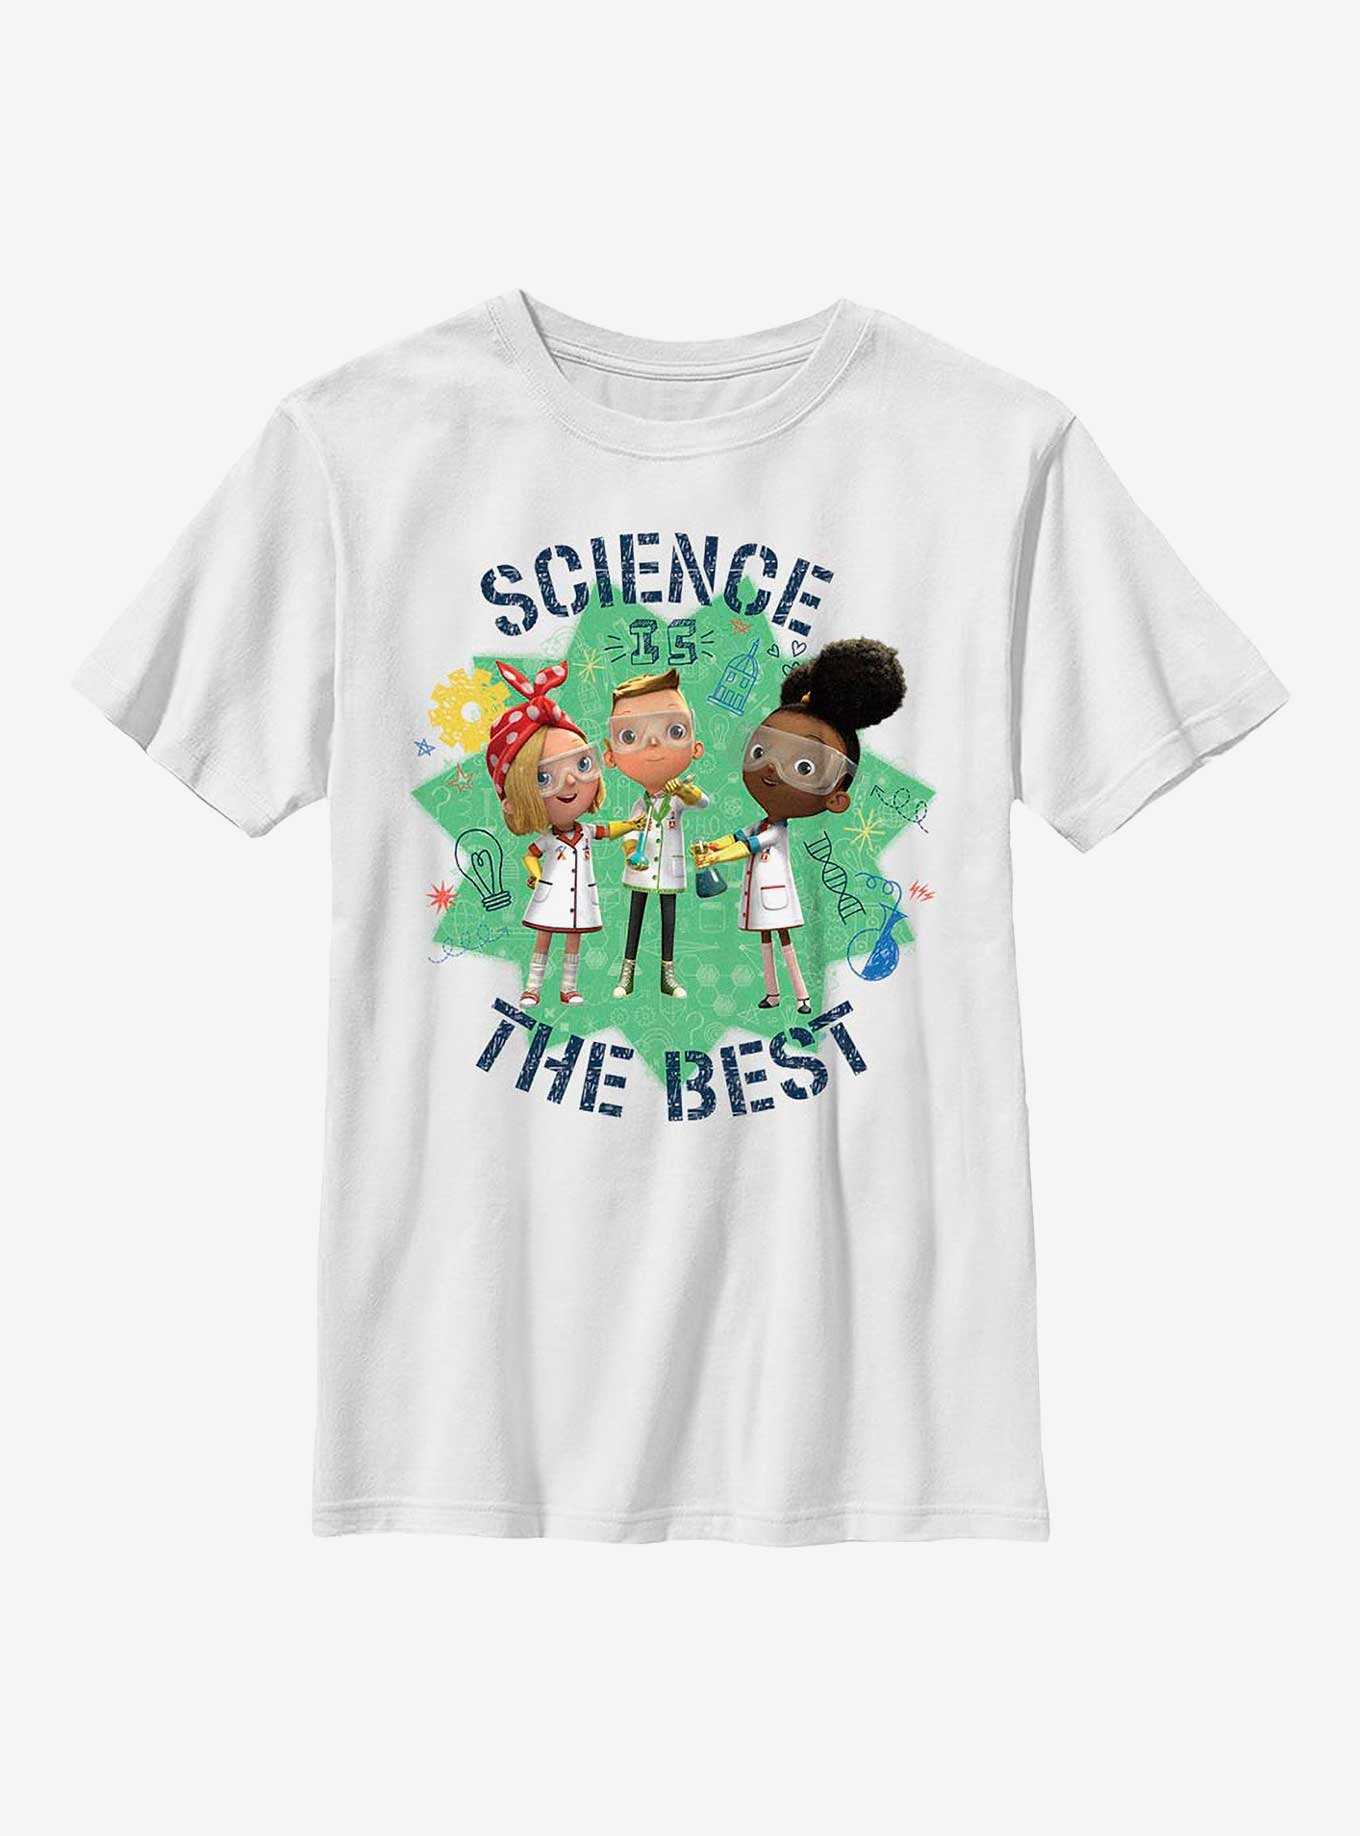 Ada Twist, Scientist Science Is The Best Youth T-Shirt, , hi-res